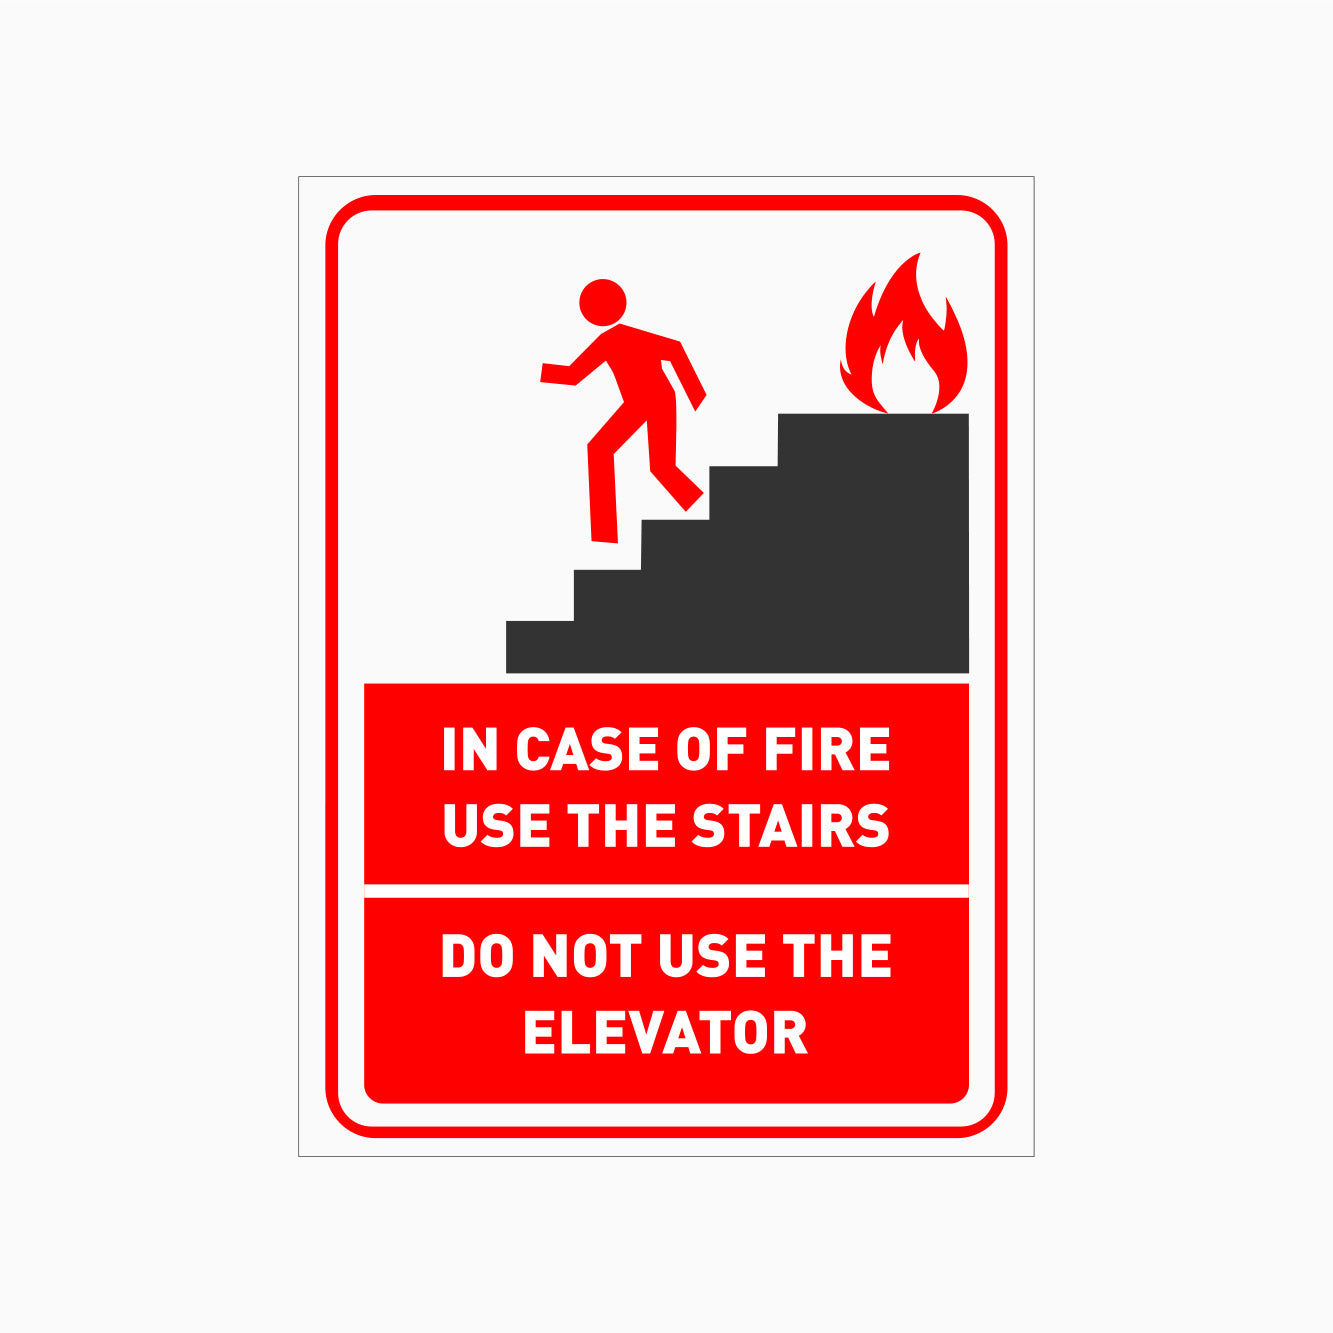 IN CASE OF FIRE USE THE STAIRS SIGN - DO NOT USE THE ELEVATOR SIGN